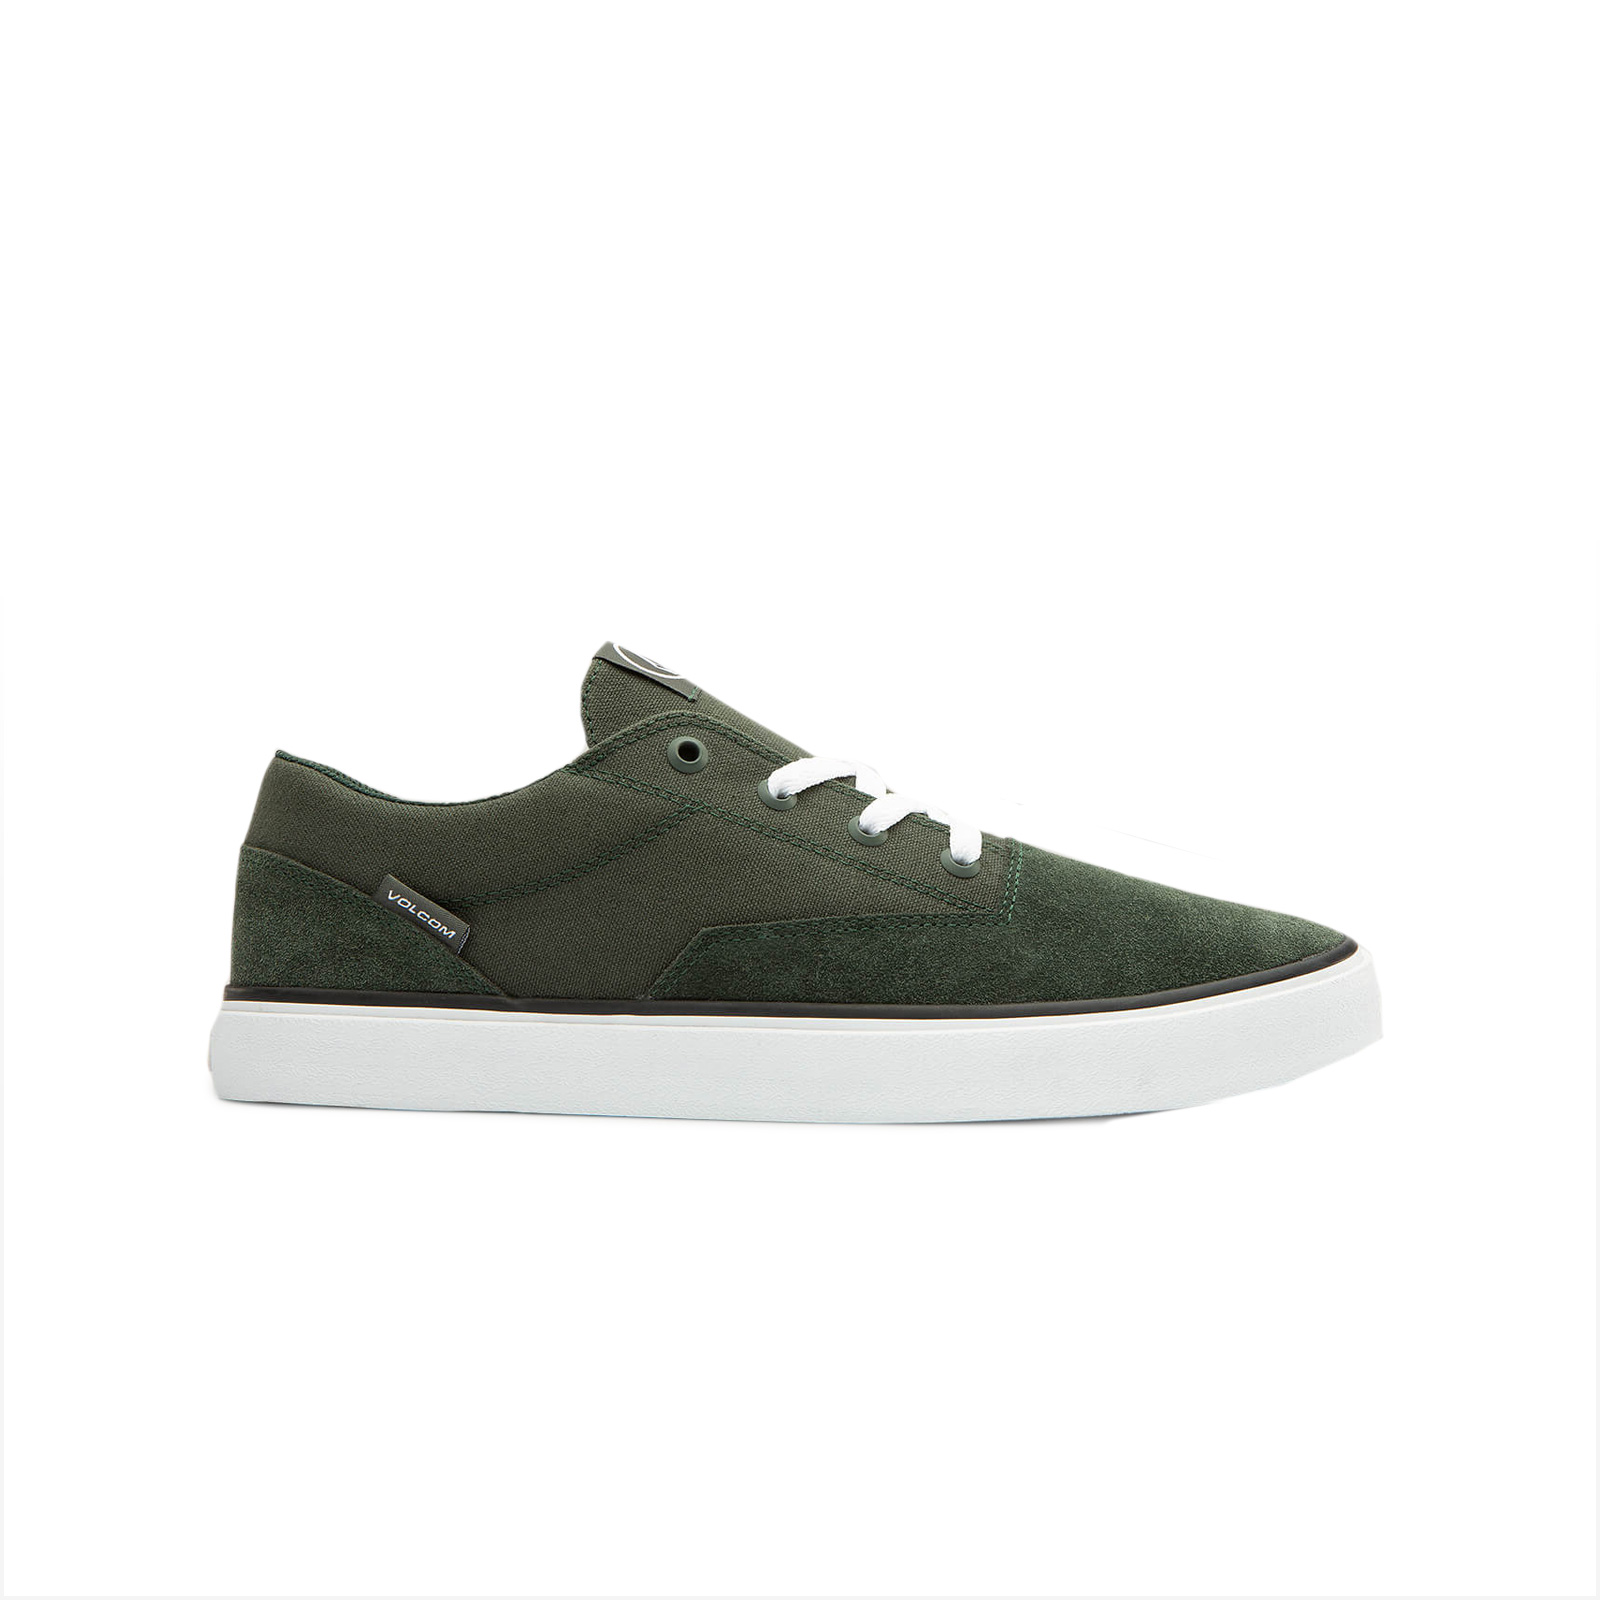 Volcom - DRAW LO SUEDE SHOE - FADED ARMY Ανδρικά > Παπούτσια > Sneaker > Παπούτσι Low Cut